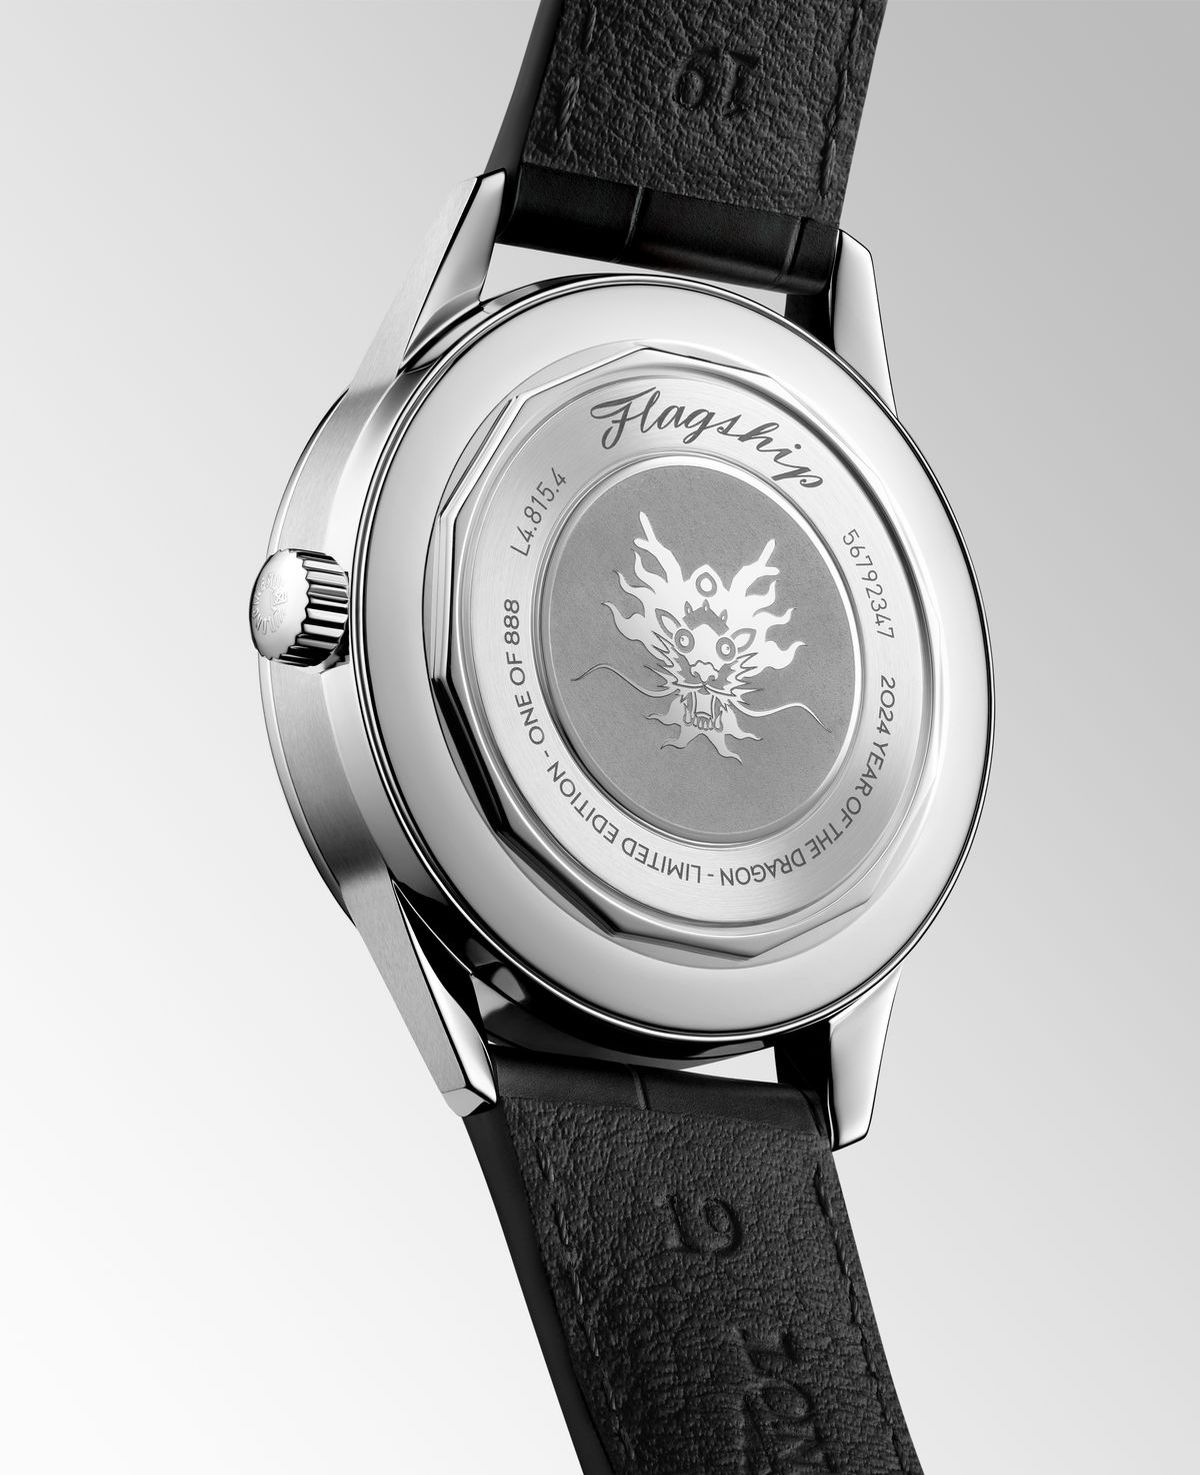 Foto: Longines Flagship Heritage Year of the Dragon.